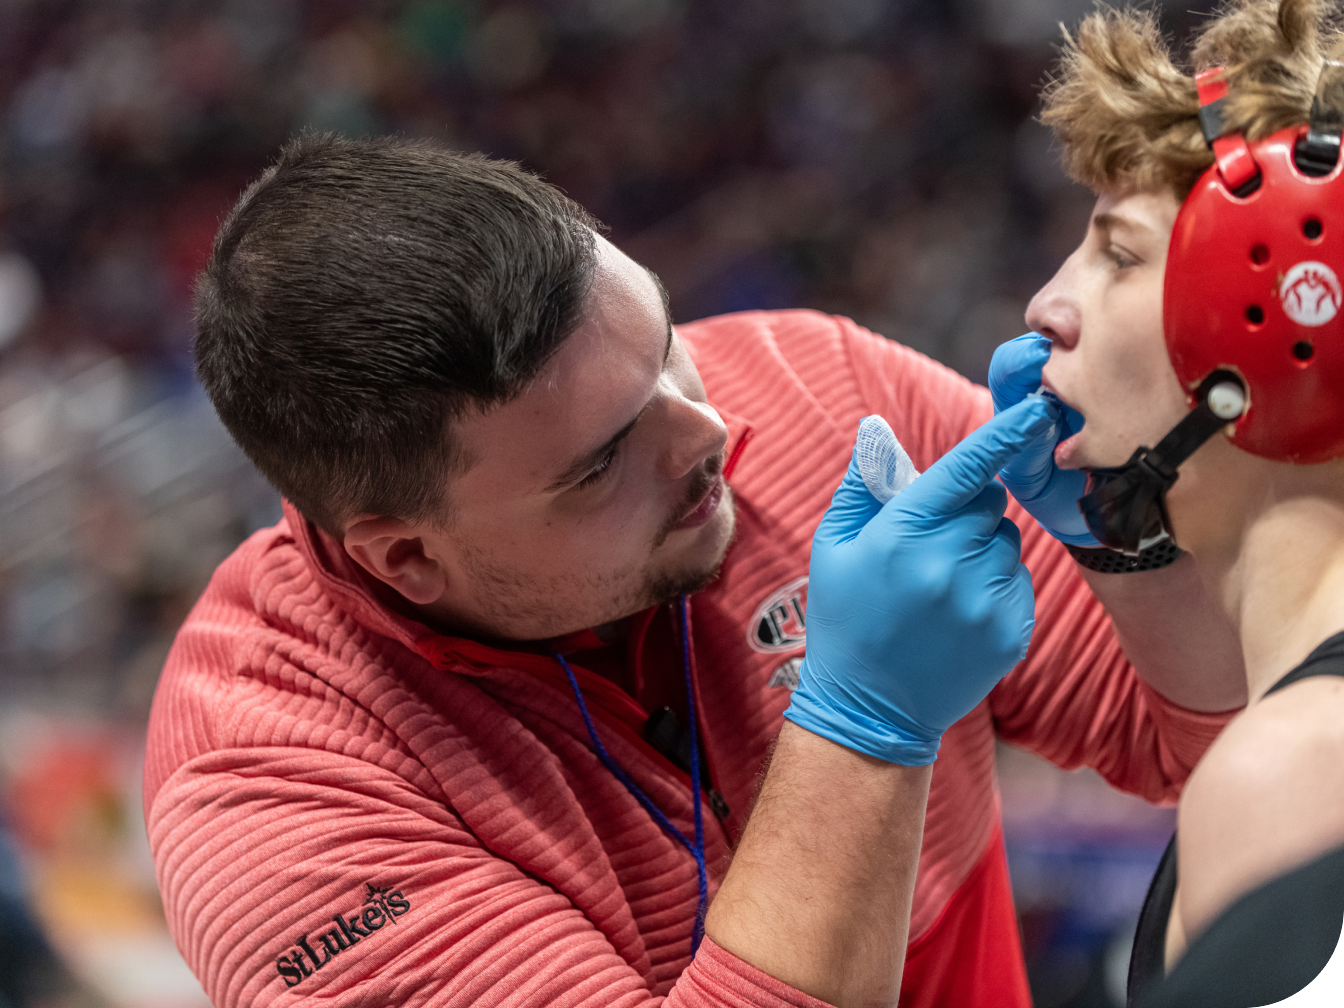 Athletic trainer looking into a wrestling athlete's mouth for injury